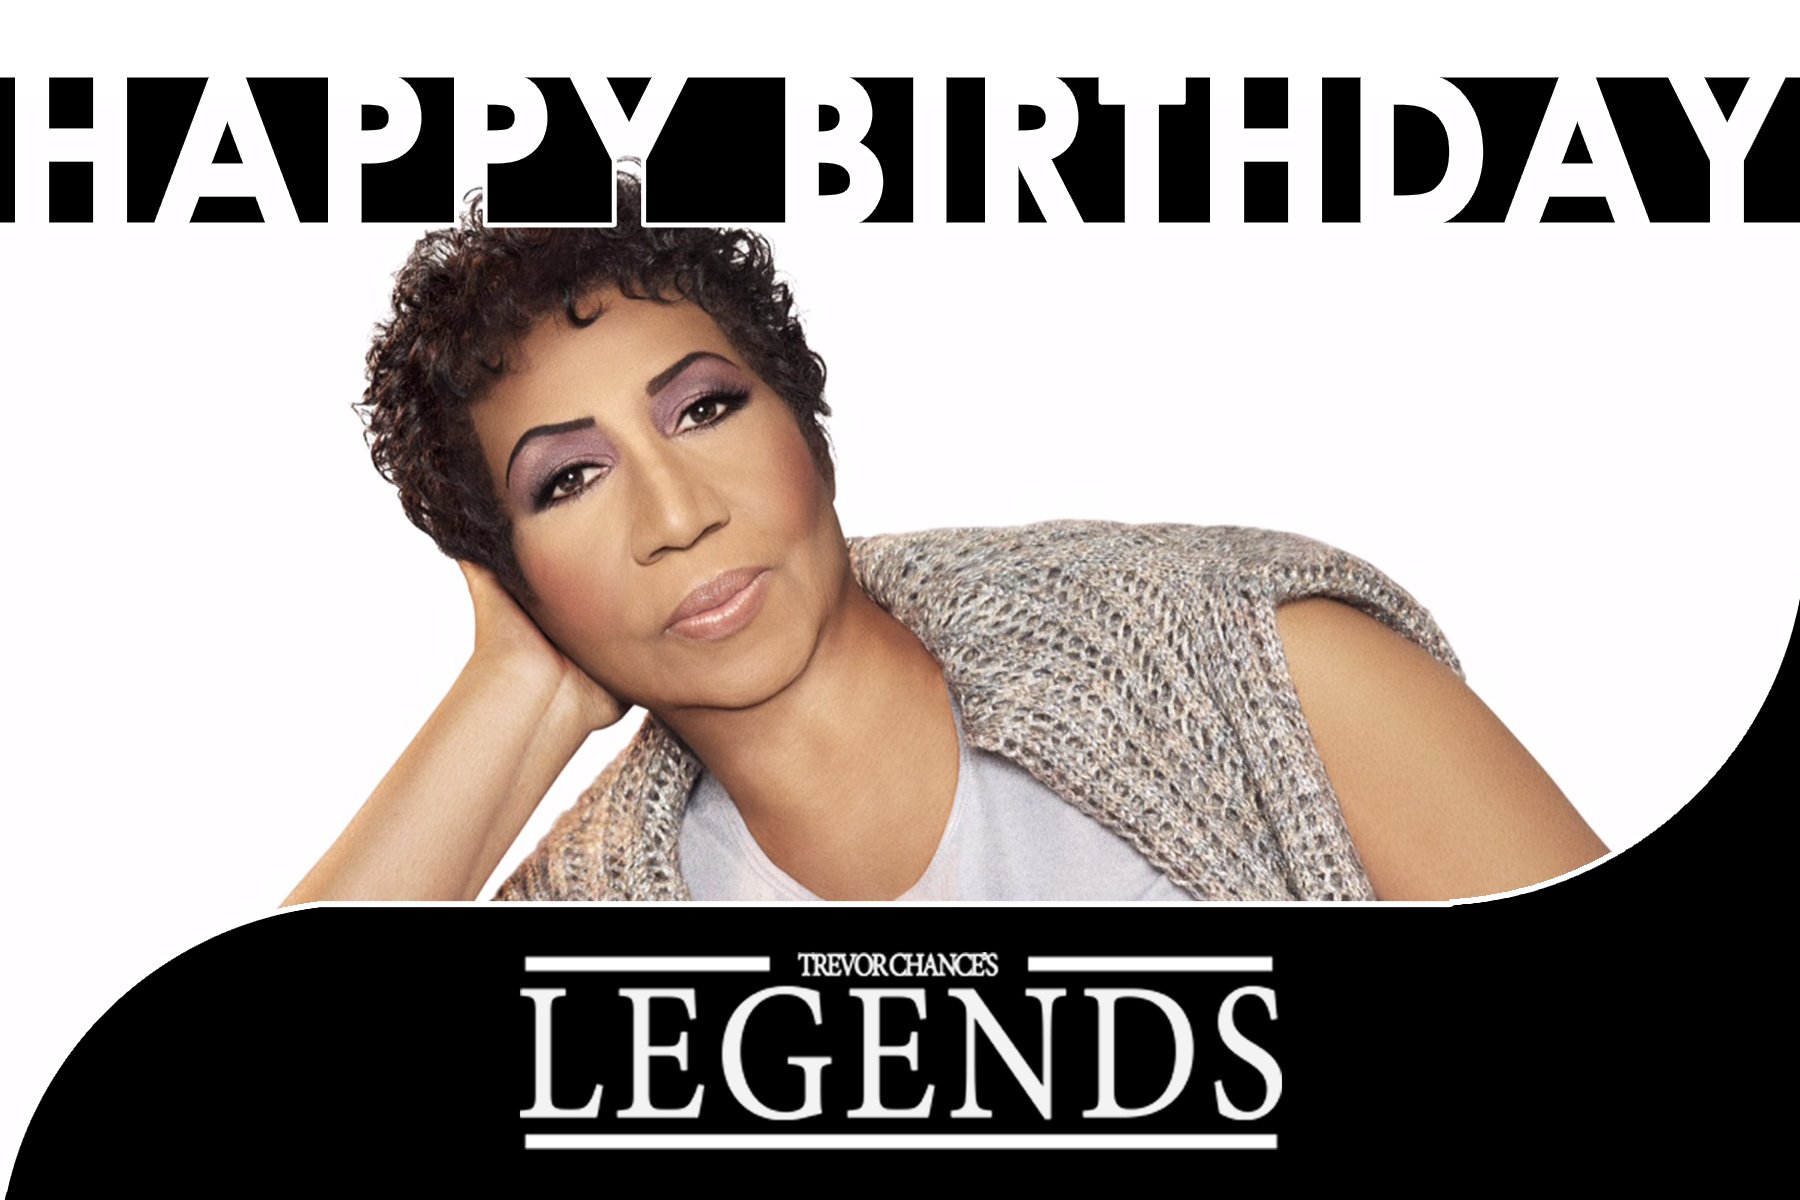 Happy Birthday to Aretha Franklin! The Queen of Soul is 75 today... 